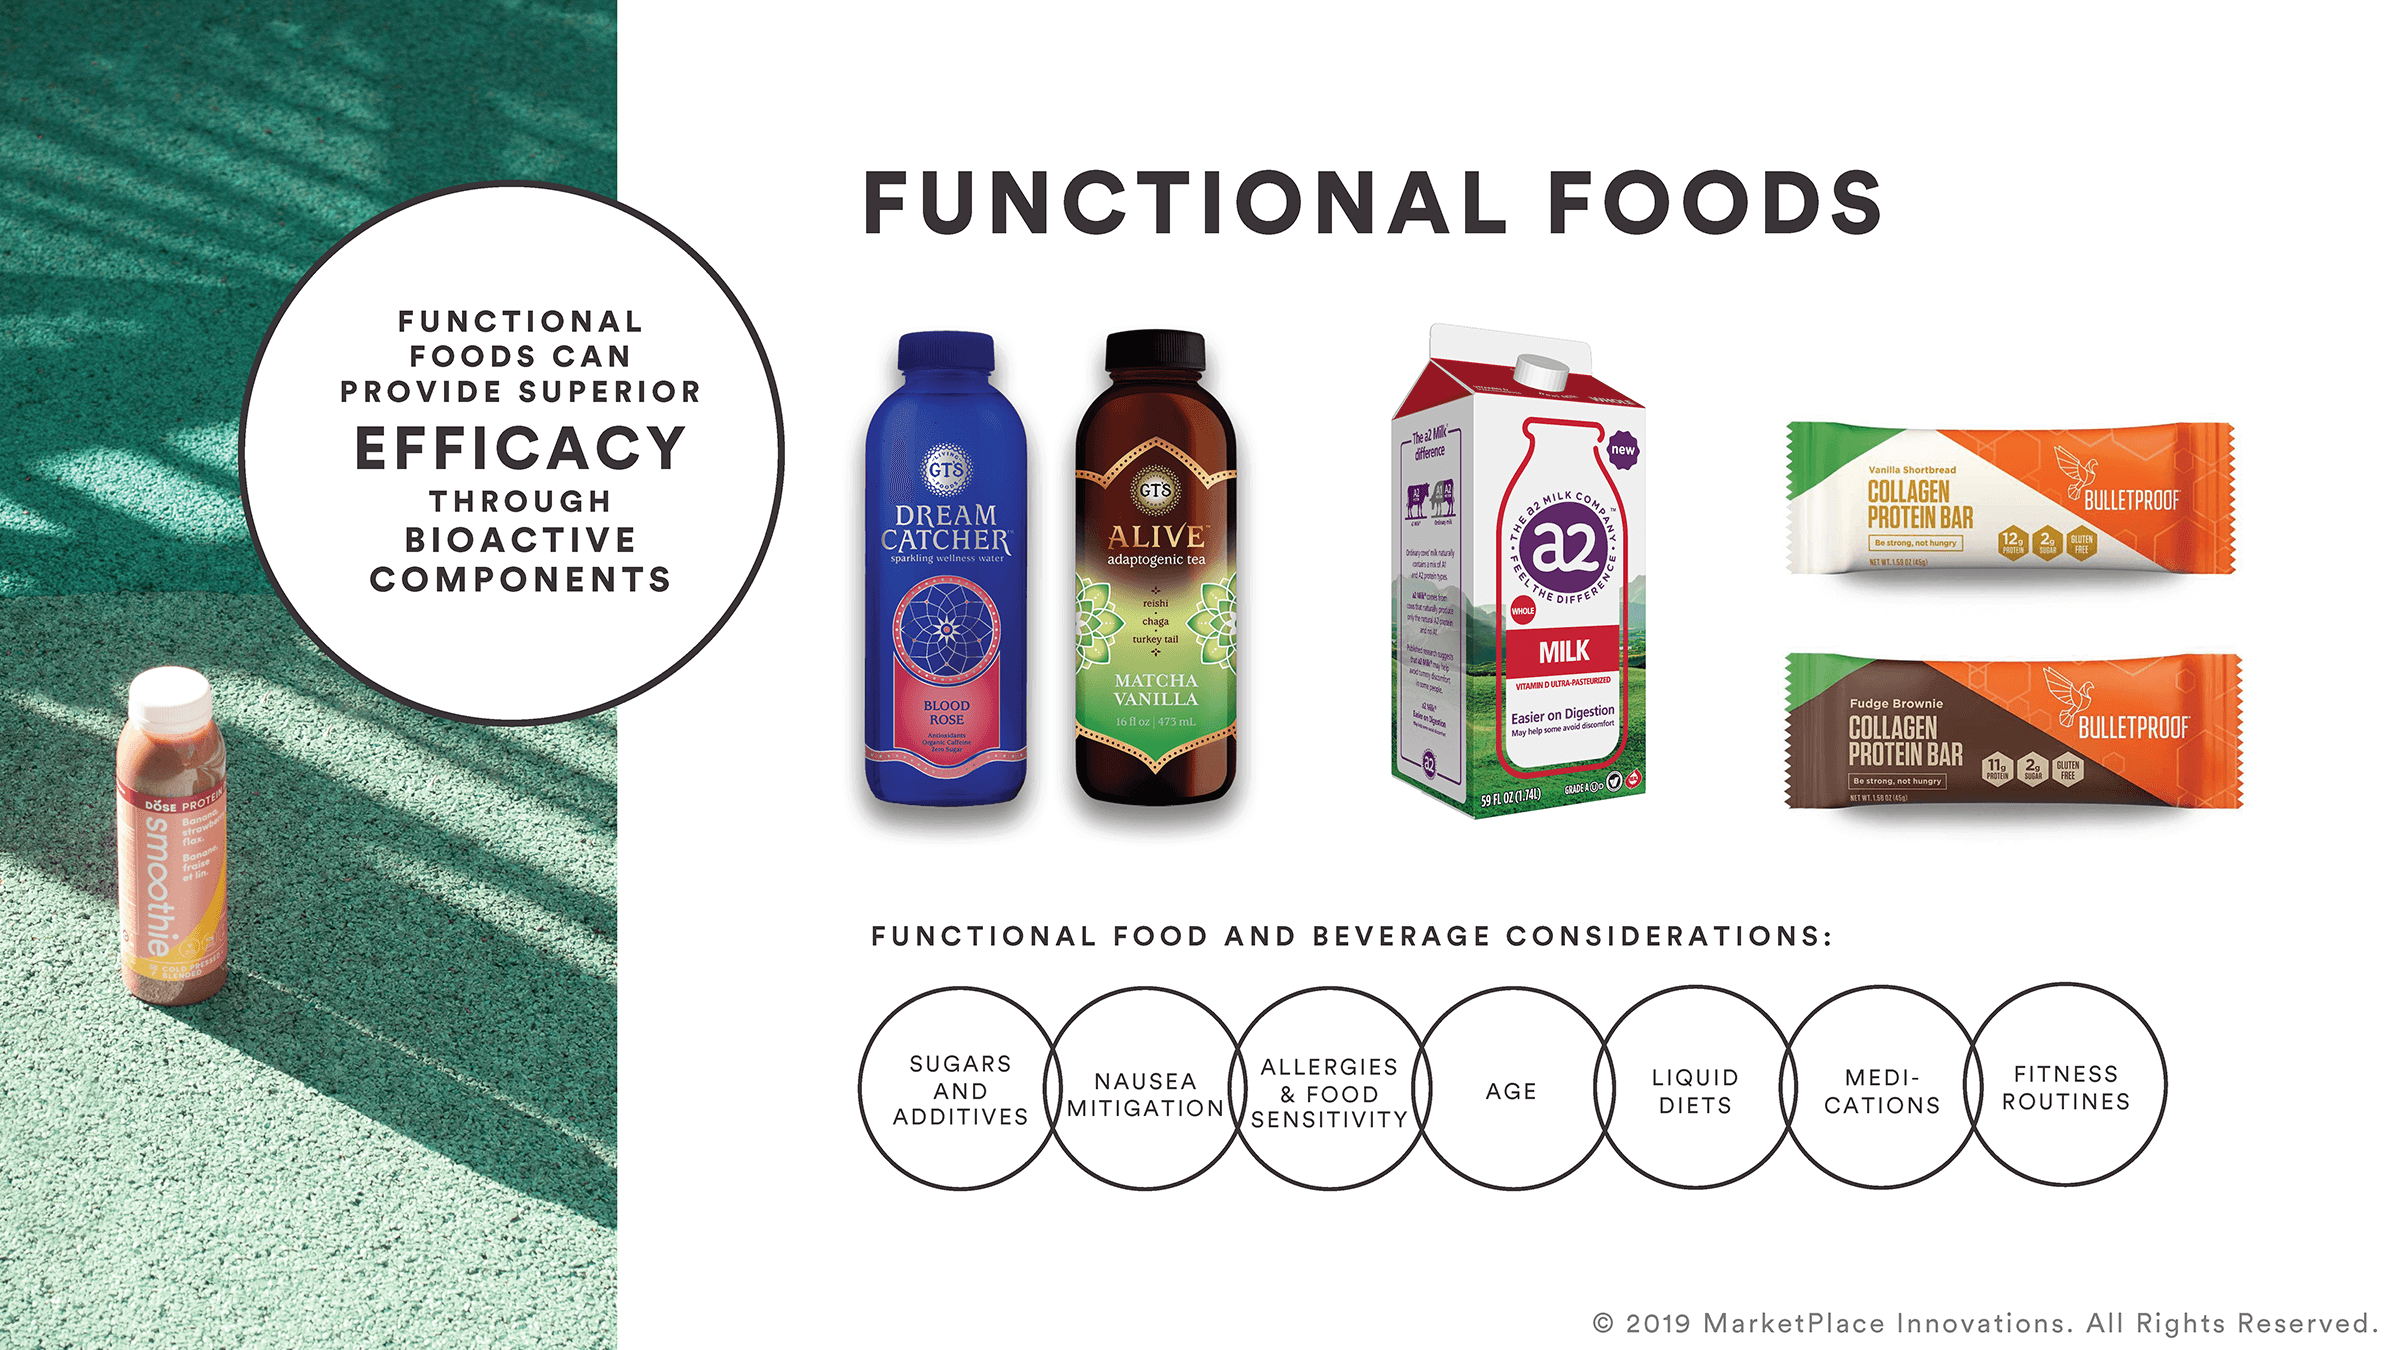 graphic showing functional foods as efficacious